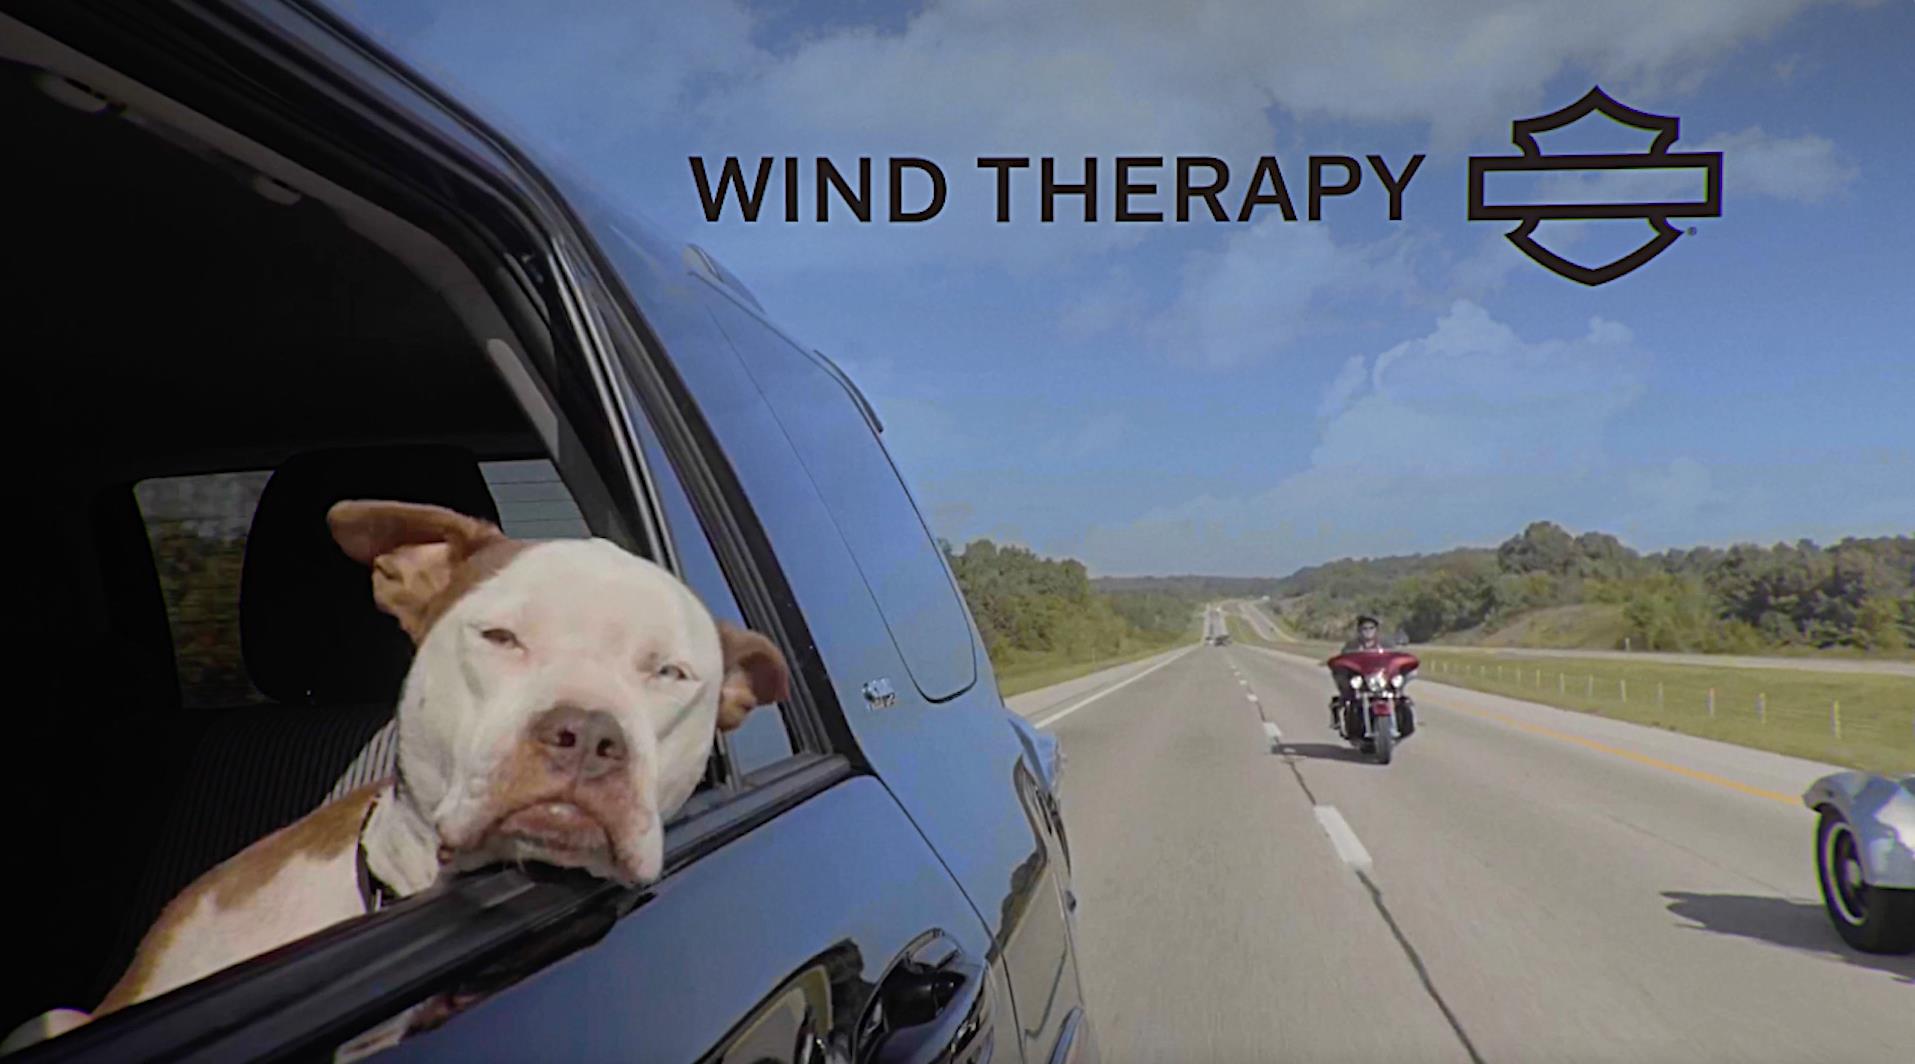 Harley Davidson "Wind Therapy" Campaign